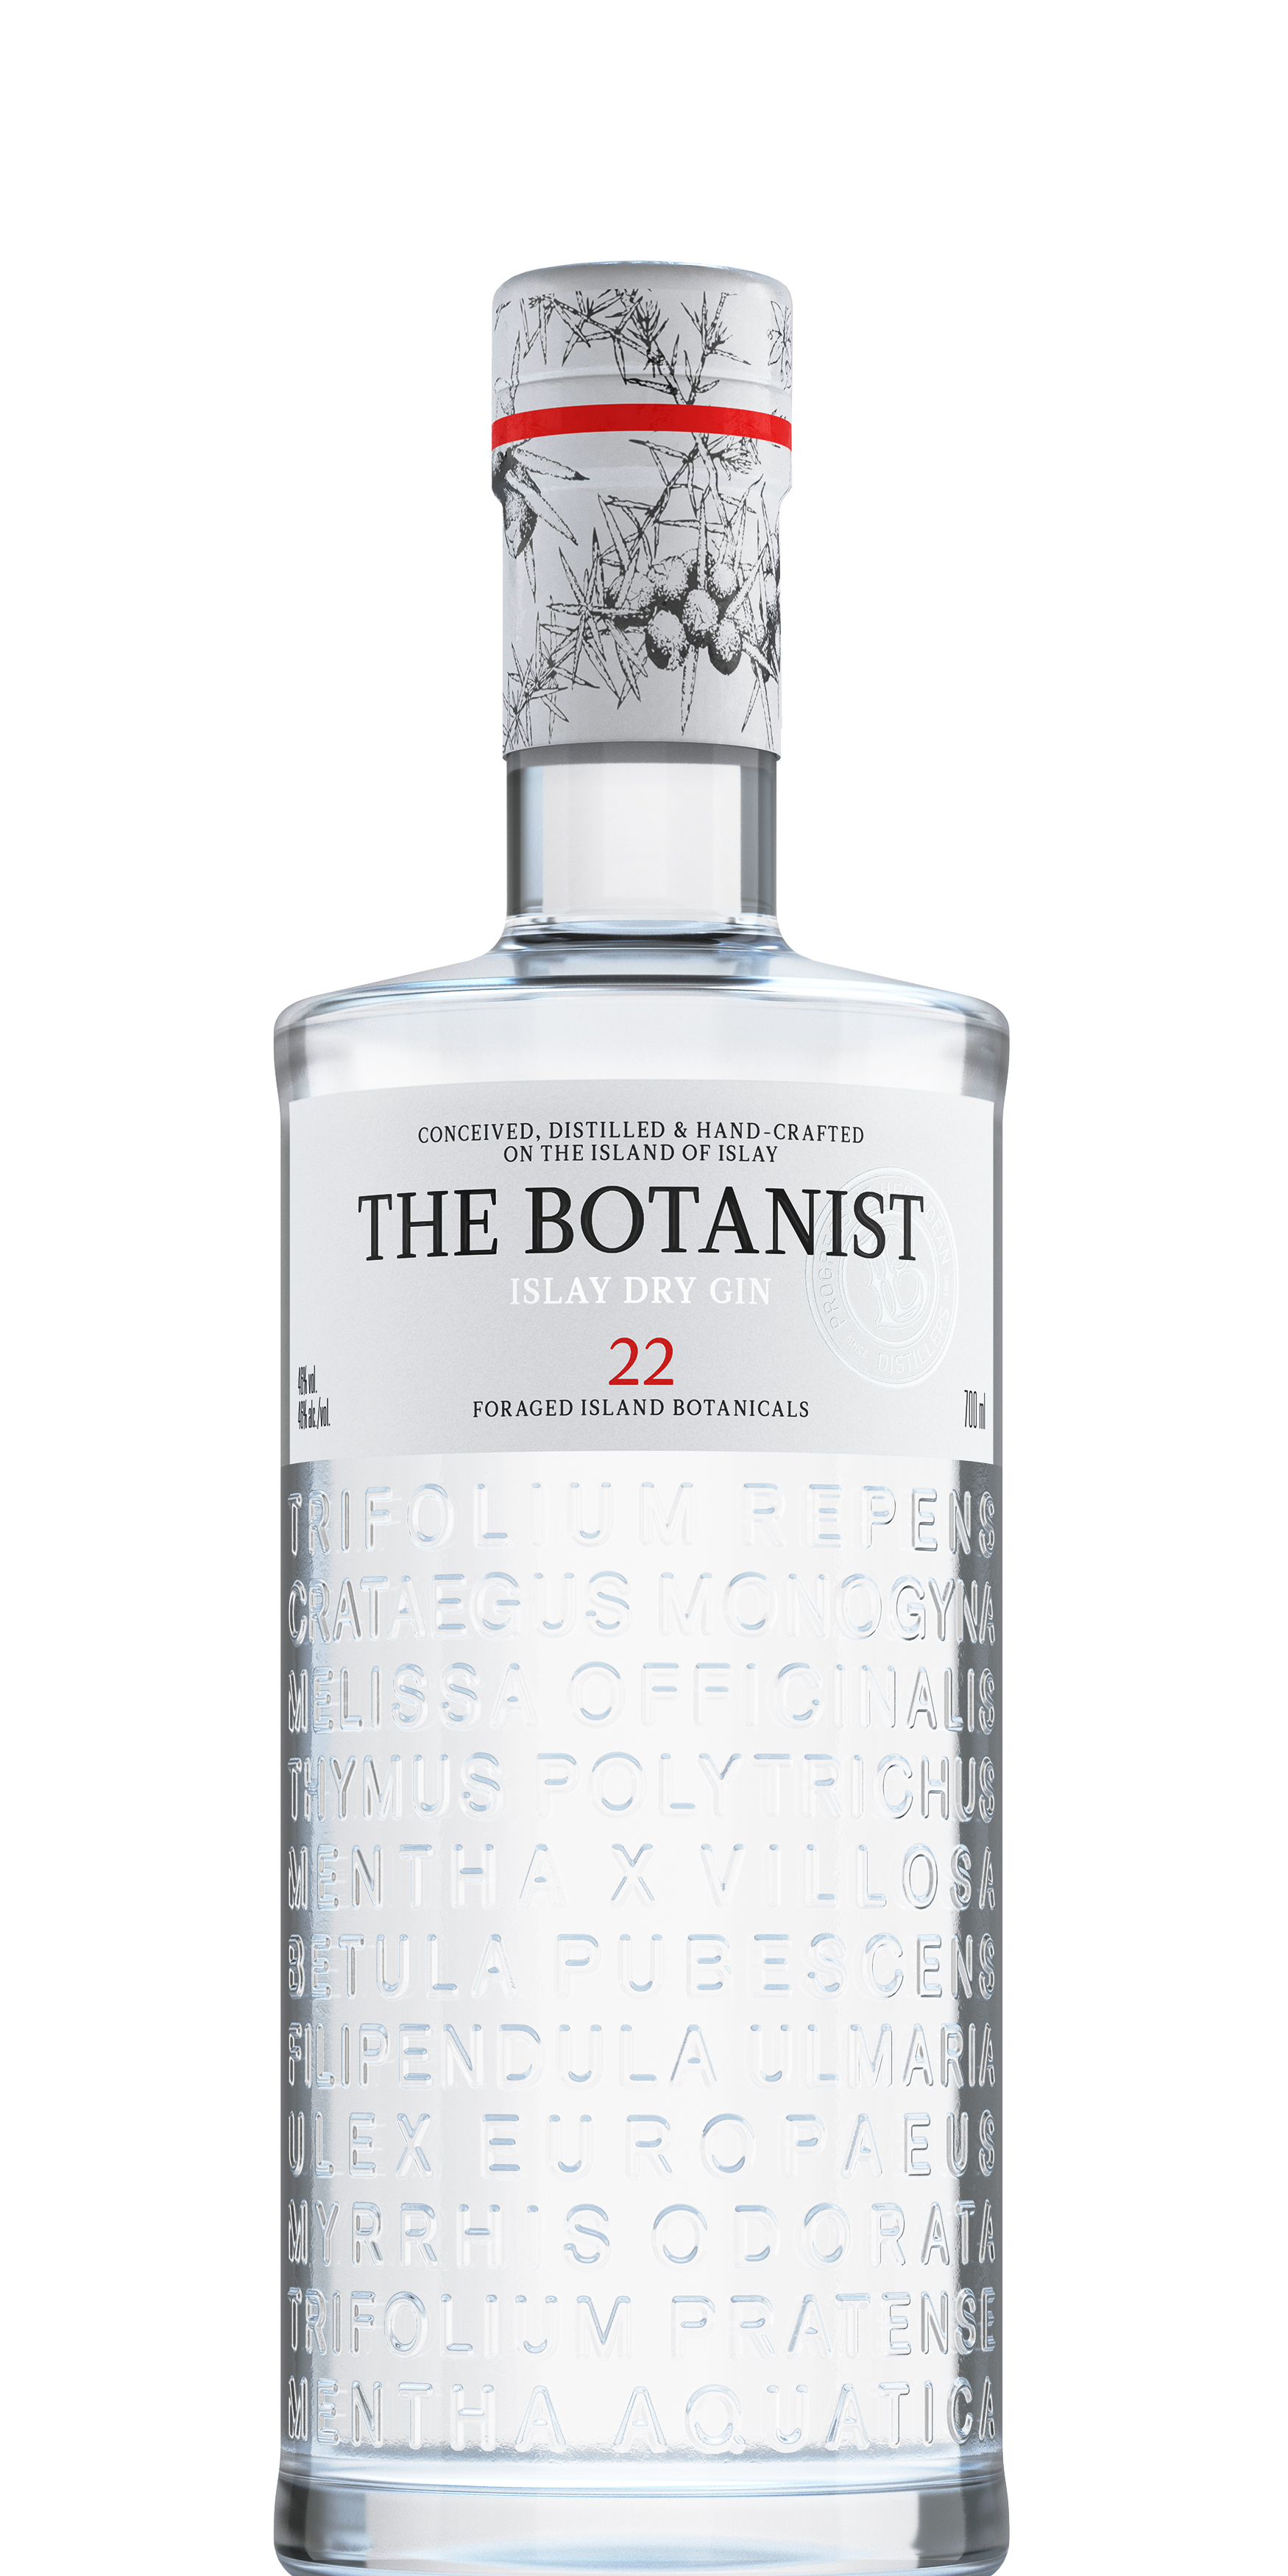 The-Botanist-700ml.png